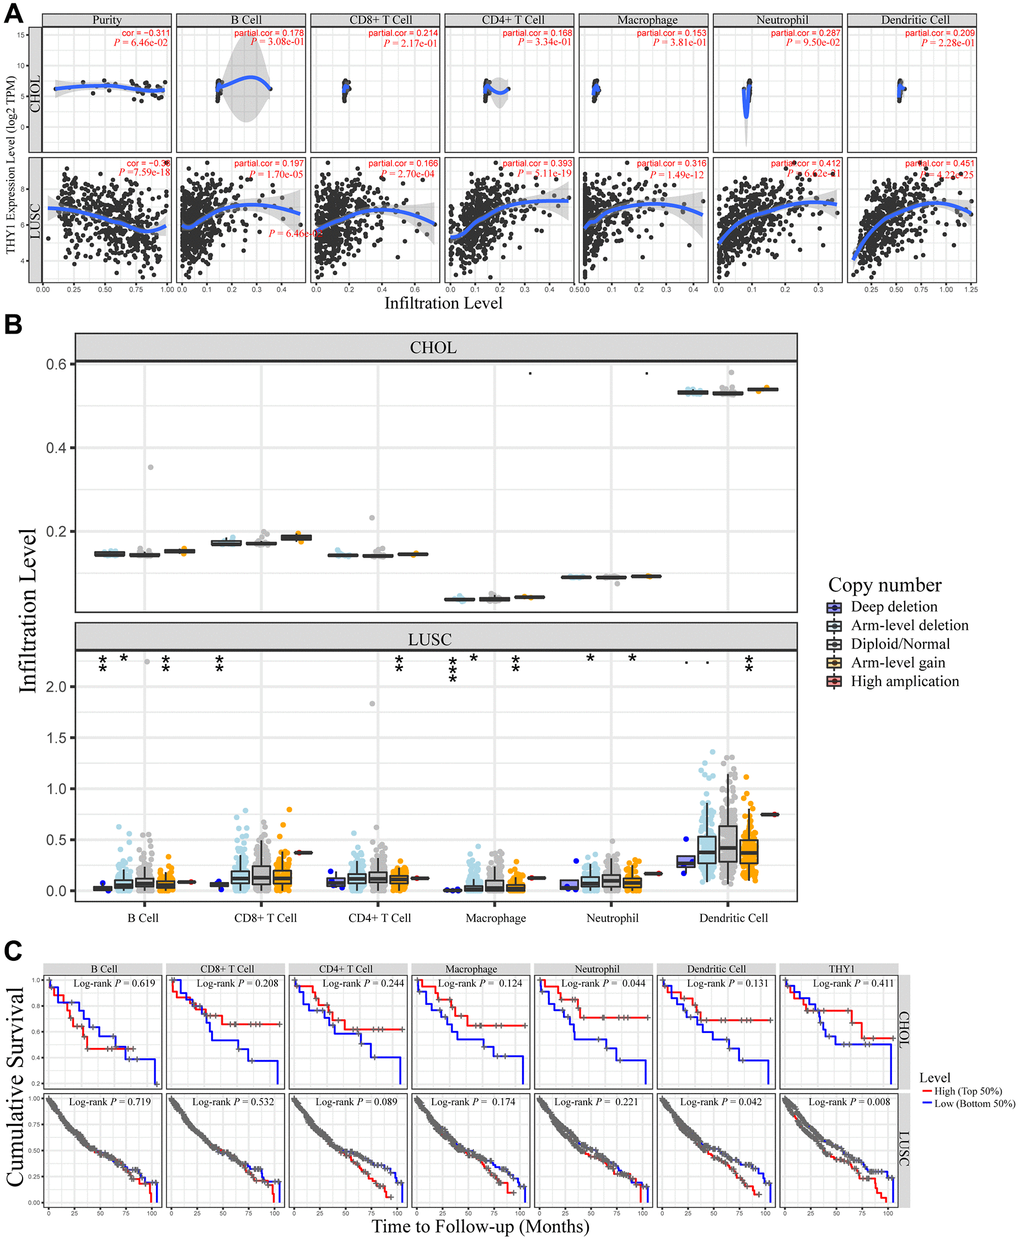 Relationships between THY1 expression and immune infiltration levels in lung squamous cell carcinoma (LUSC) and cholangiocarcinoma (CHOL). (A) Differentially expressed THY1 was significantly correlated with lymphocytes infiltration levels in LUSC, but not in CHOL. (B) Copy number alteration of different immune lymphocytes was significantly correlated with immune infiltration levels in LUSC, but not in CHOL. (C) Higher THY1 expression and dendritic cell infiltration level significantly correlated with poorer prognosis in LUSC.